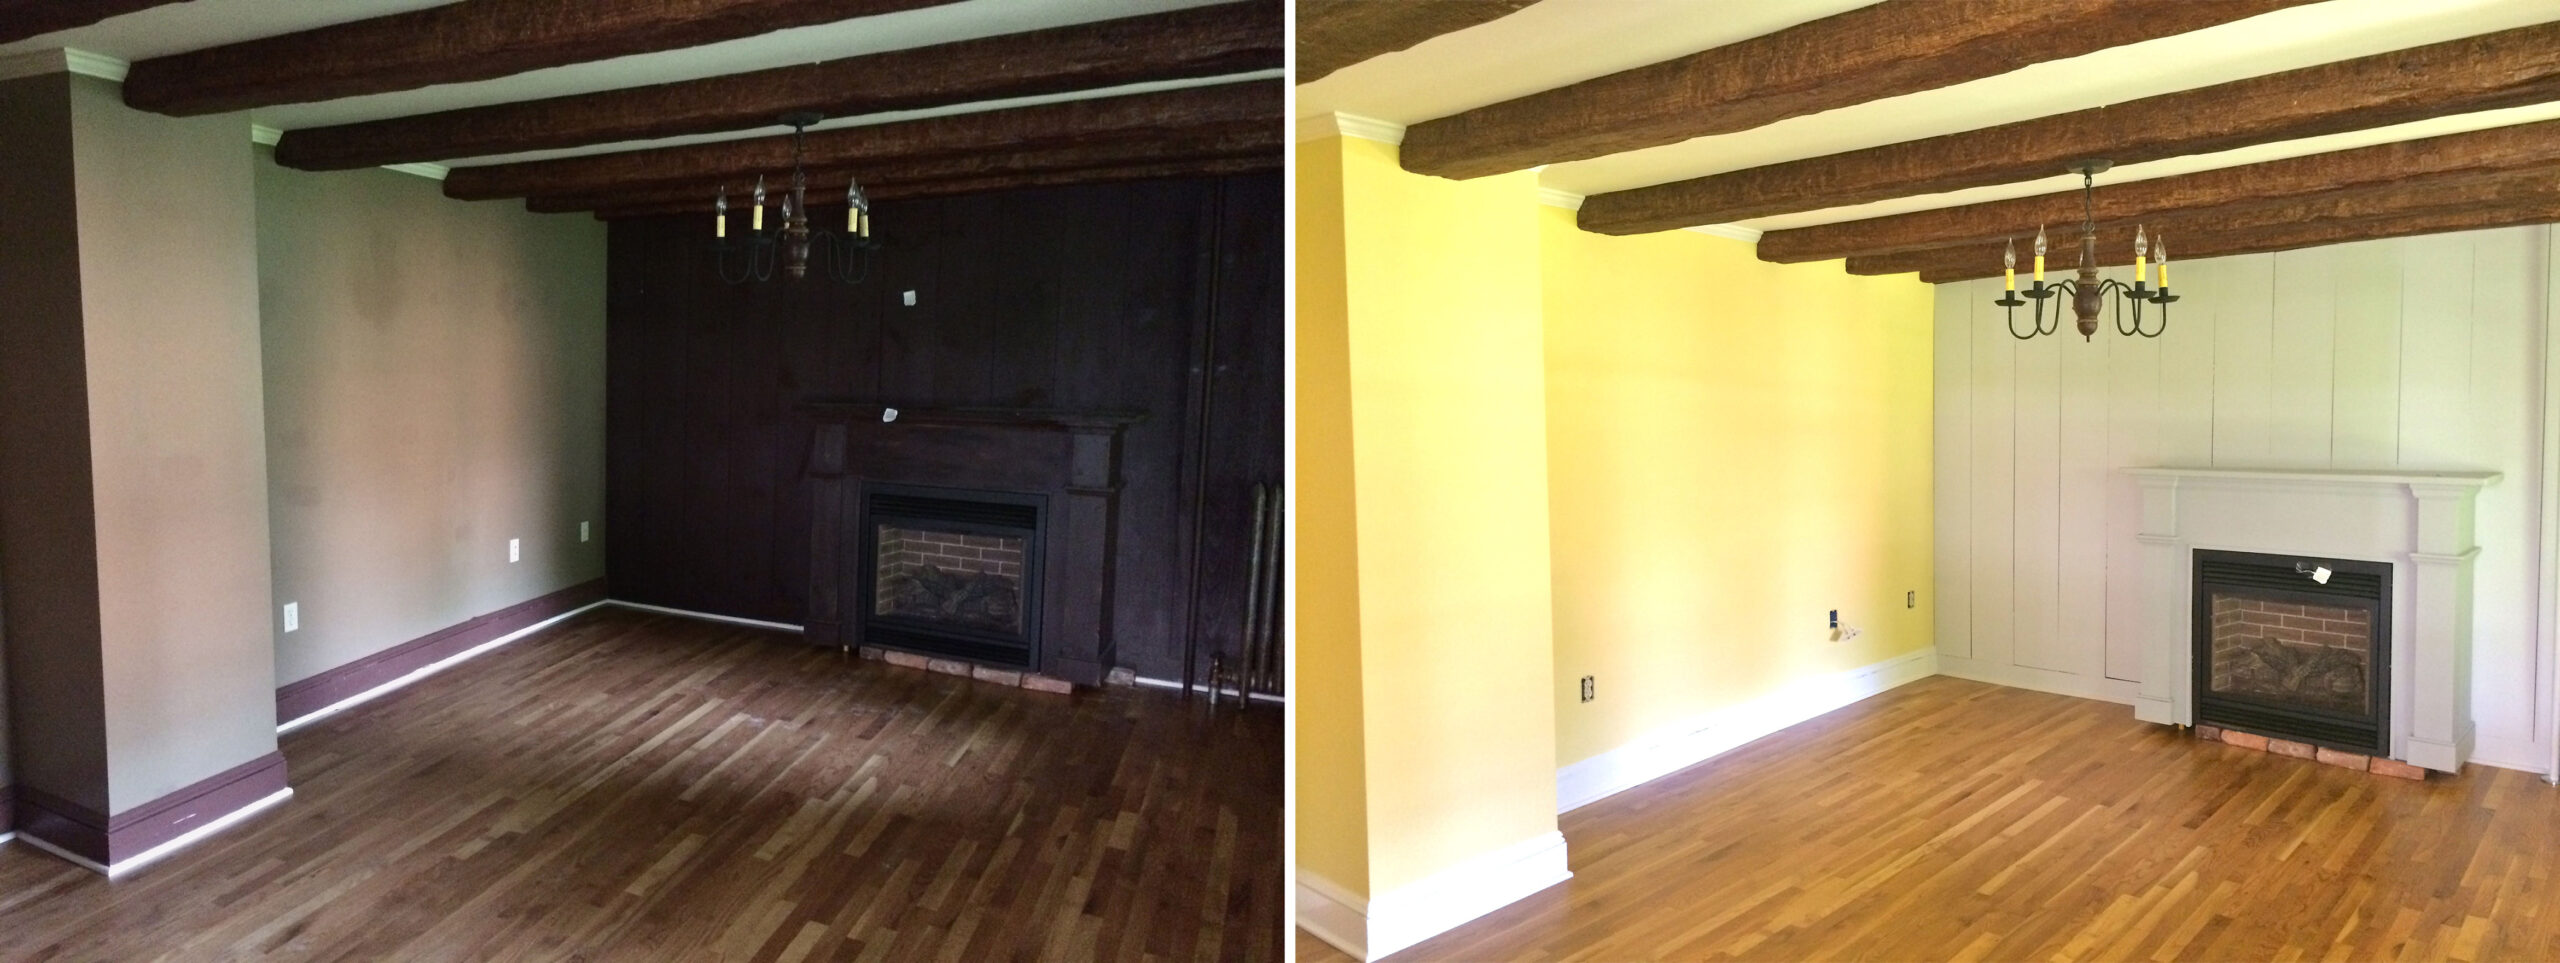 Interior Living Room Painting Before and After